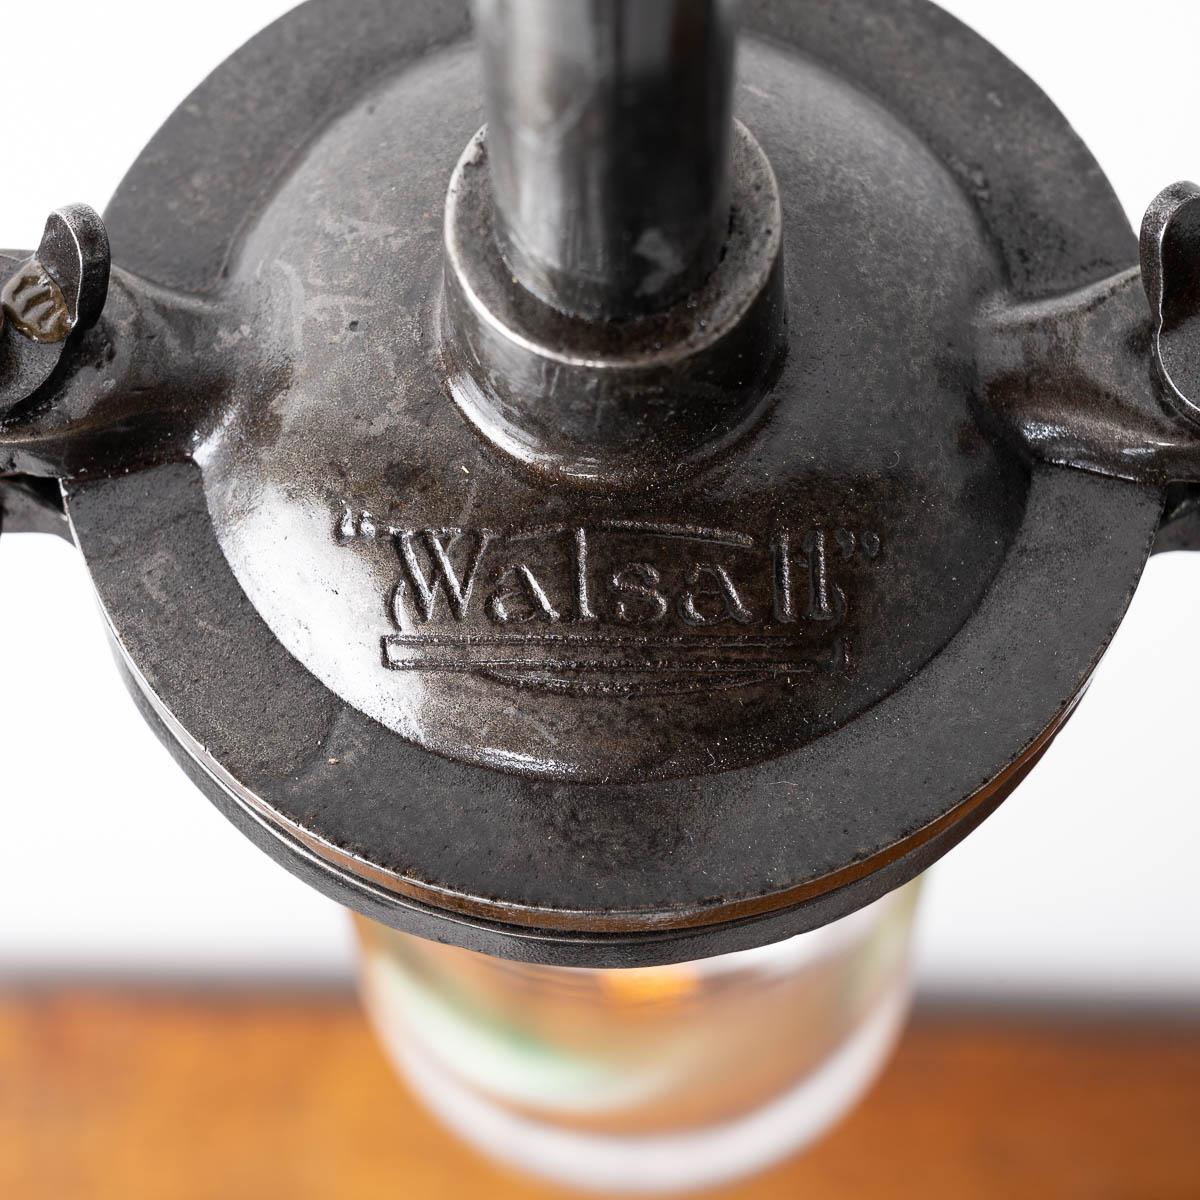 British Reclaimed Vintage Well Glass Wall Light Fittings by Walsall Conduits Ltd For Sale